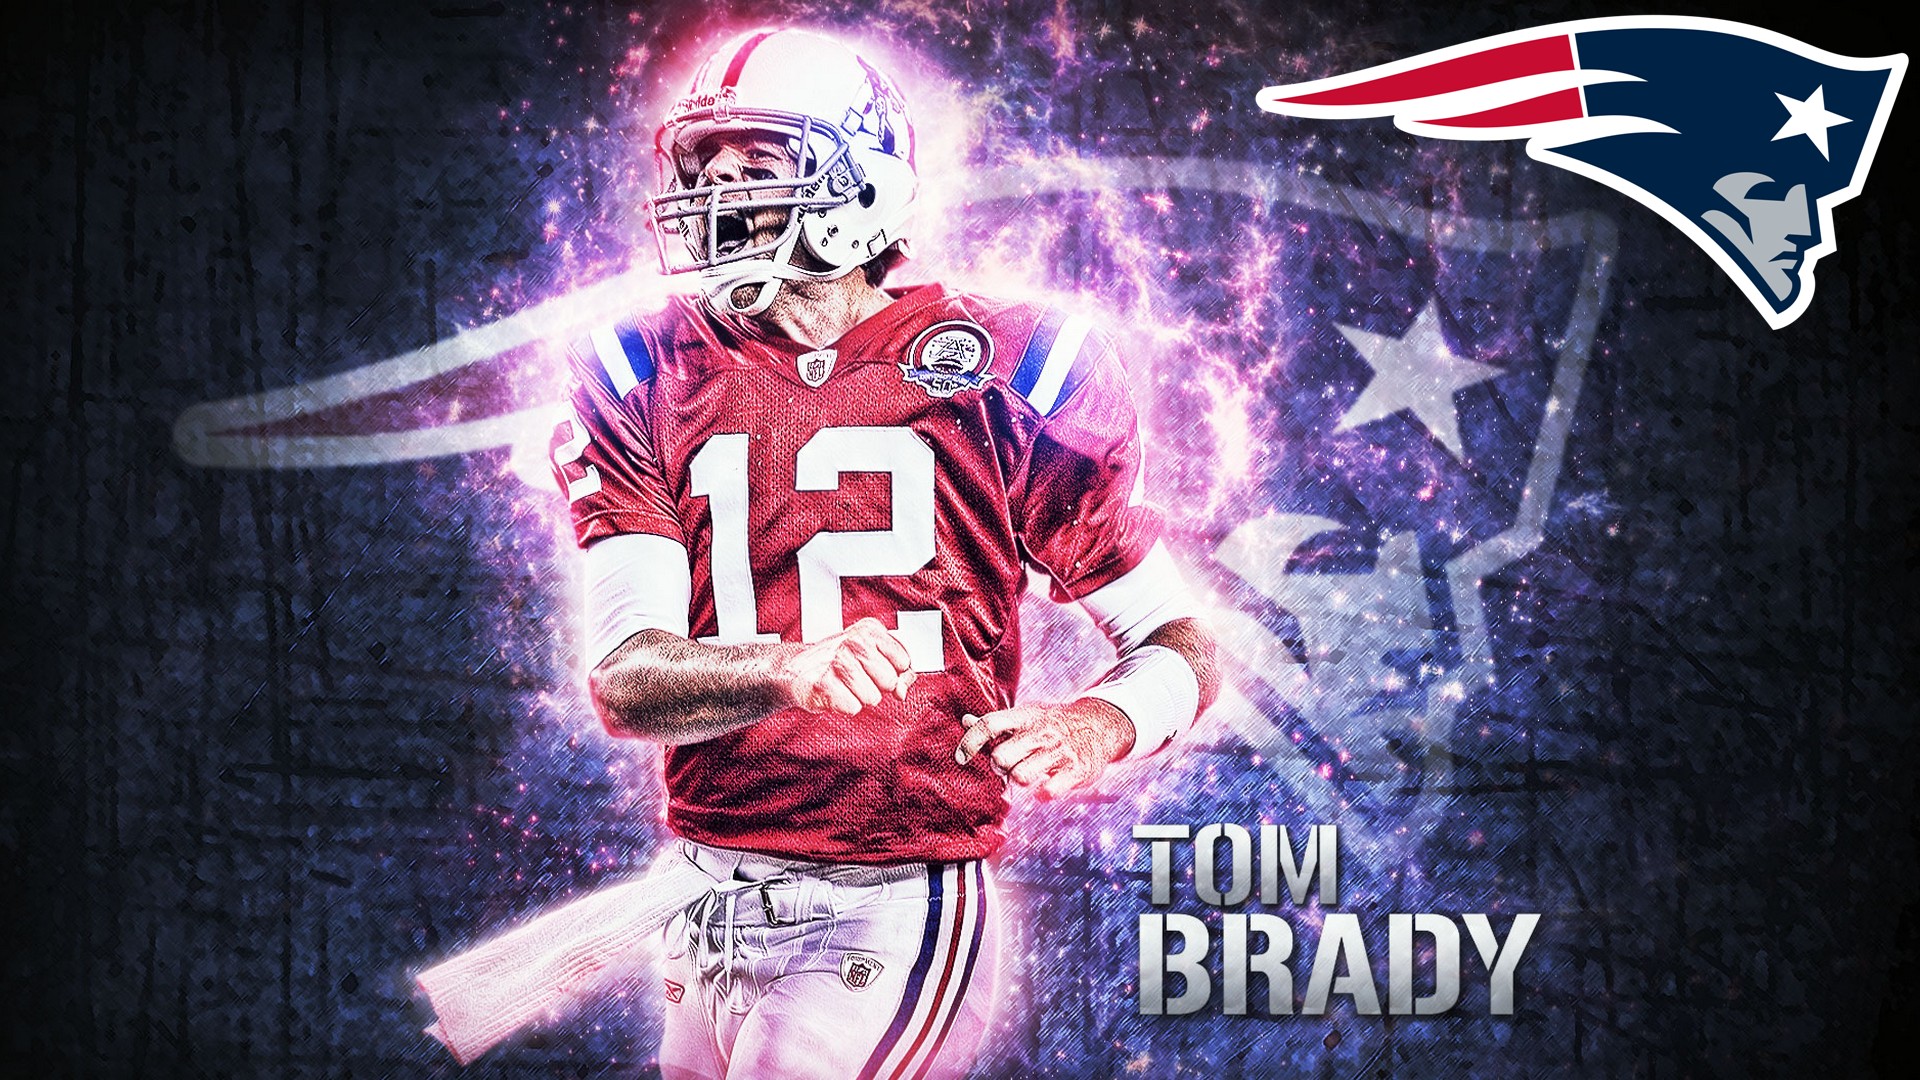 Tom Brady Patriots Mac Backgrounds With Resolution 1920X1080 pixel. You can make this wallpaper for your Mac or Windows Desktop Background, iPhone, Android or Tablet and another Smartphone device for free